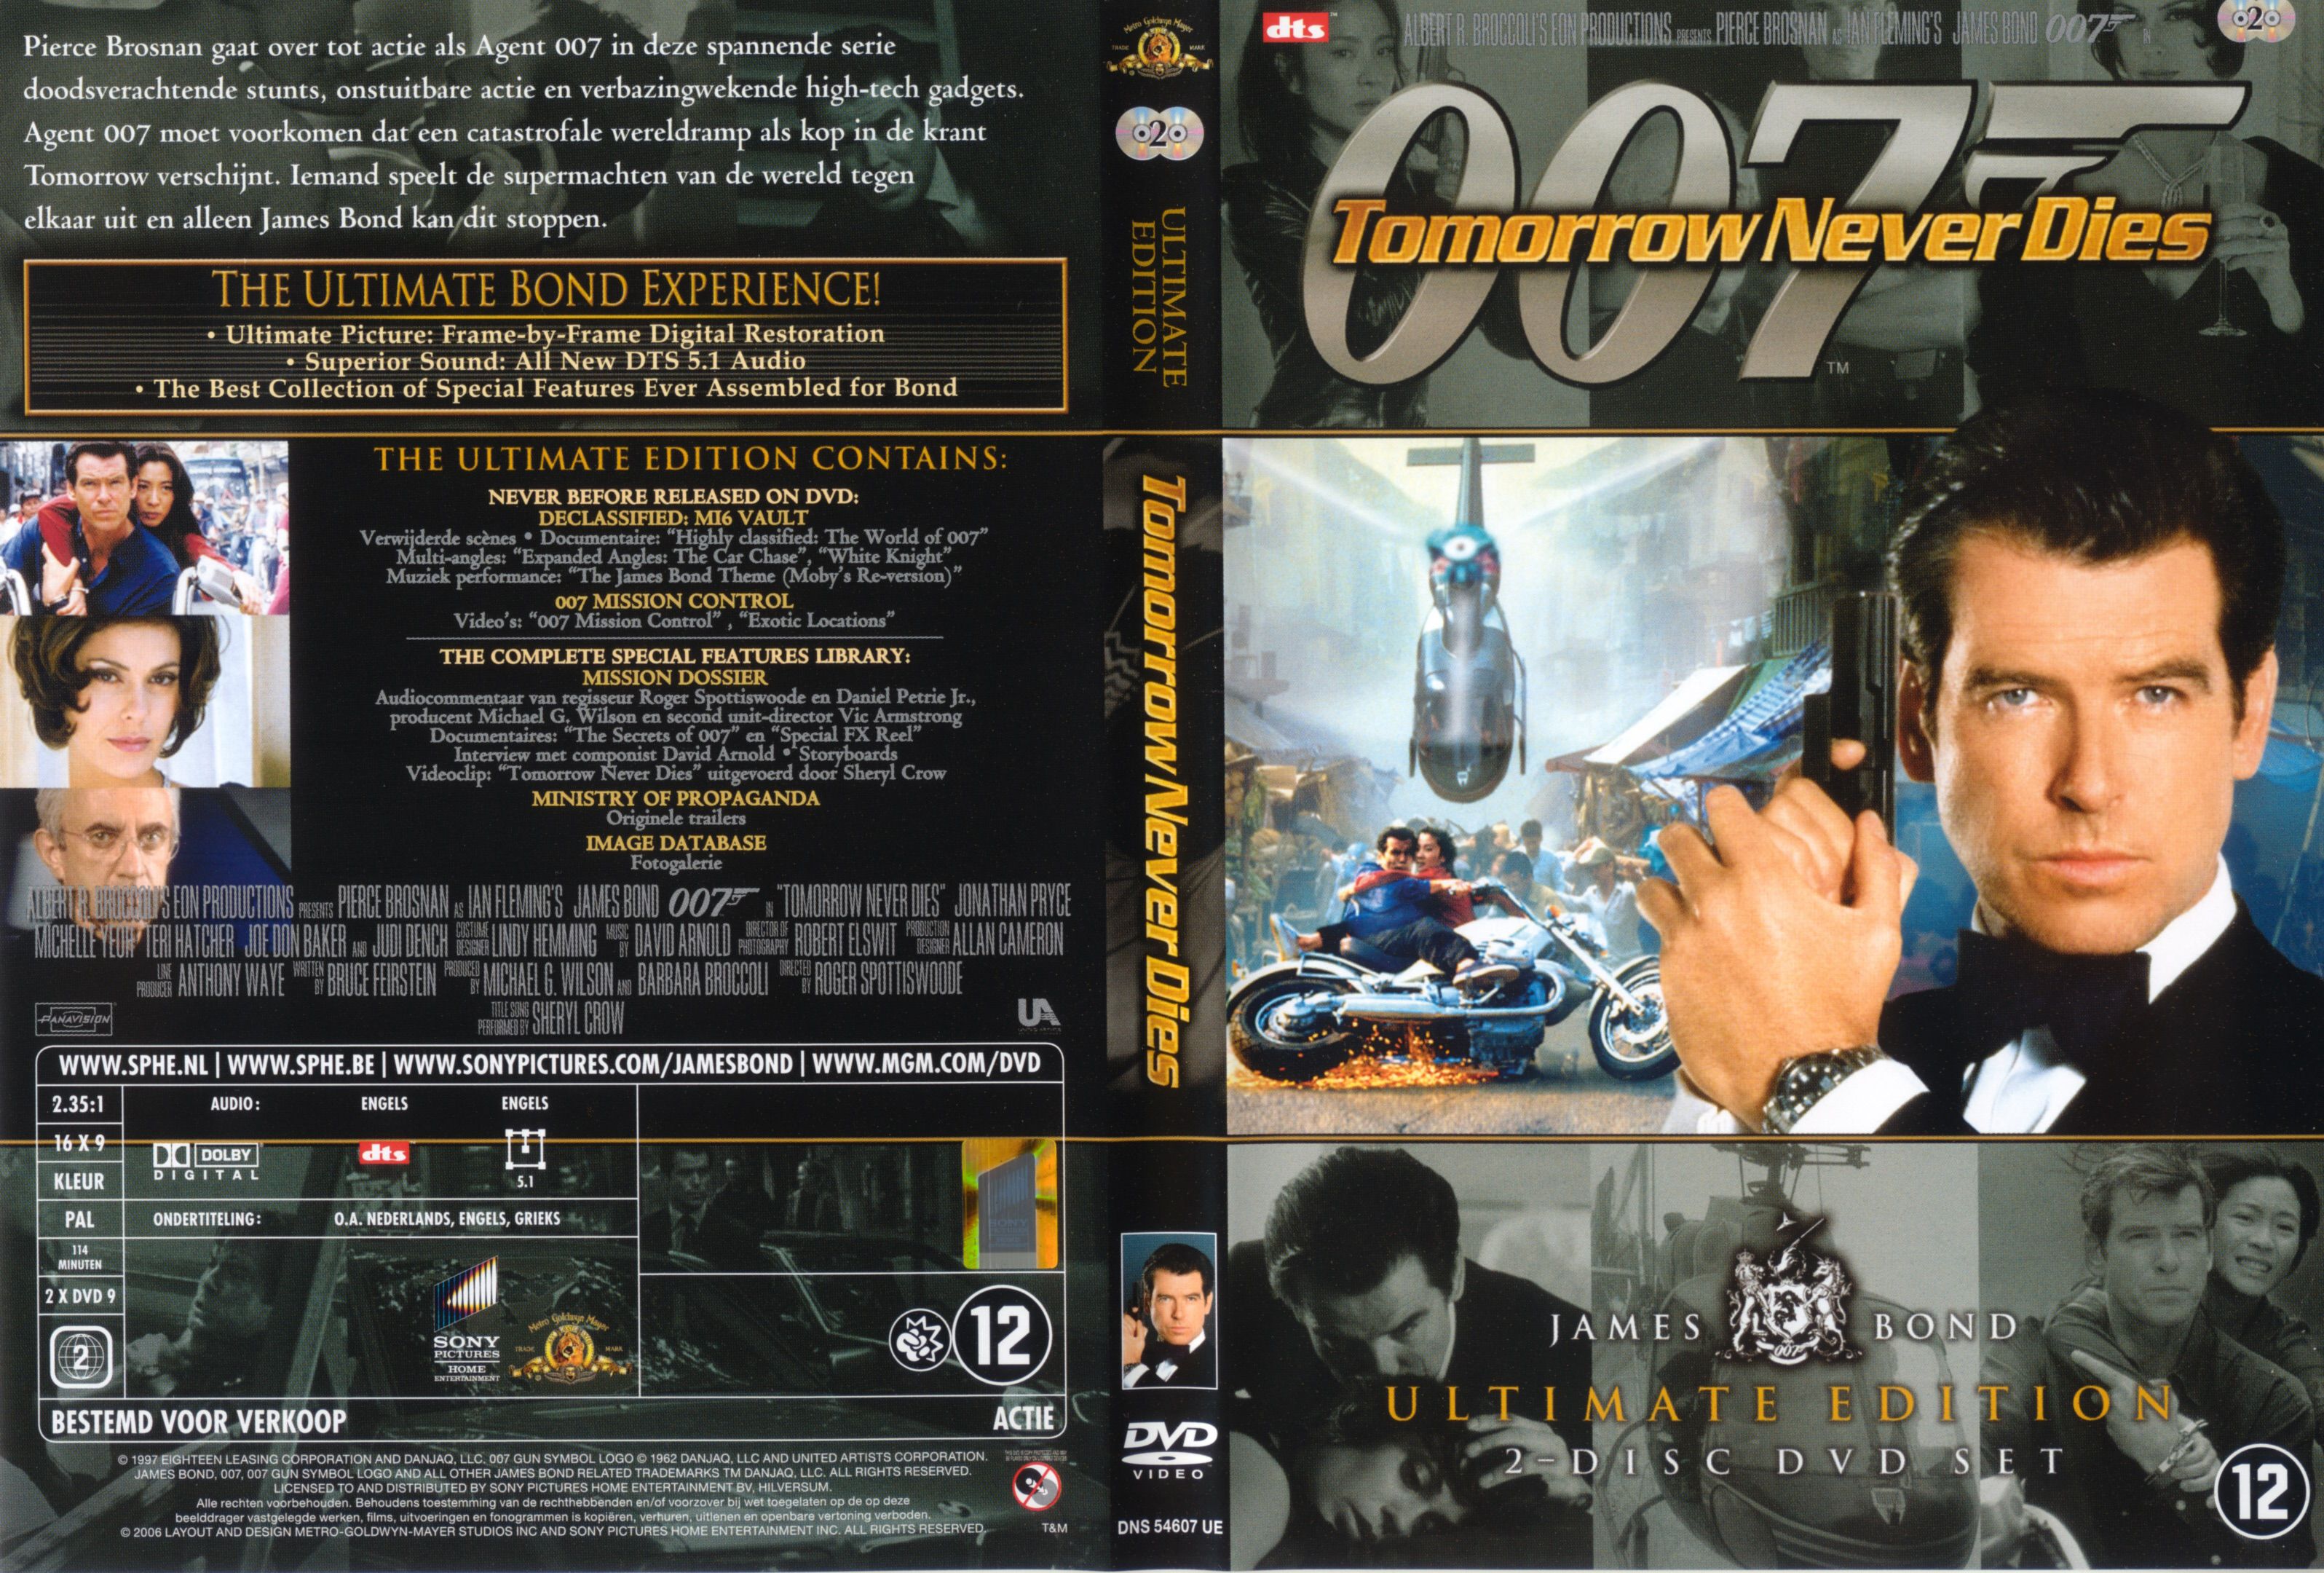 COVERS.BOX.SK ::: James Bond, Tomorrow Never Dies (Ultimate Edition) quality DVD / Blueray / Movie